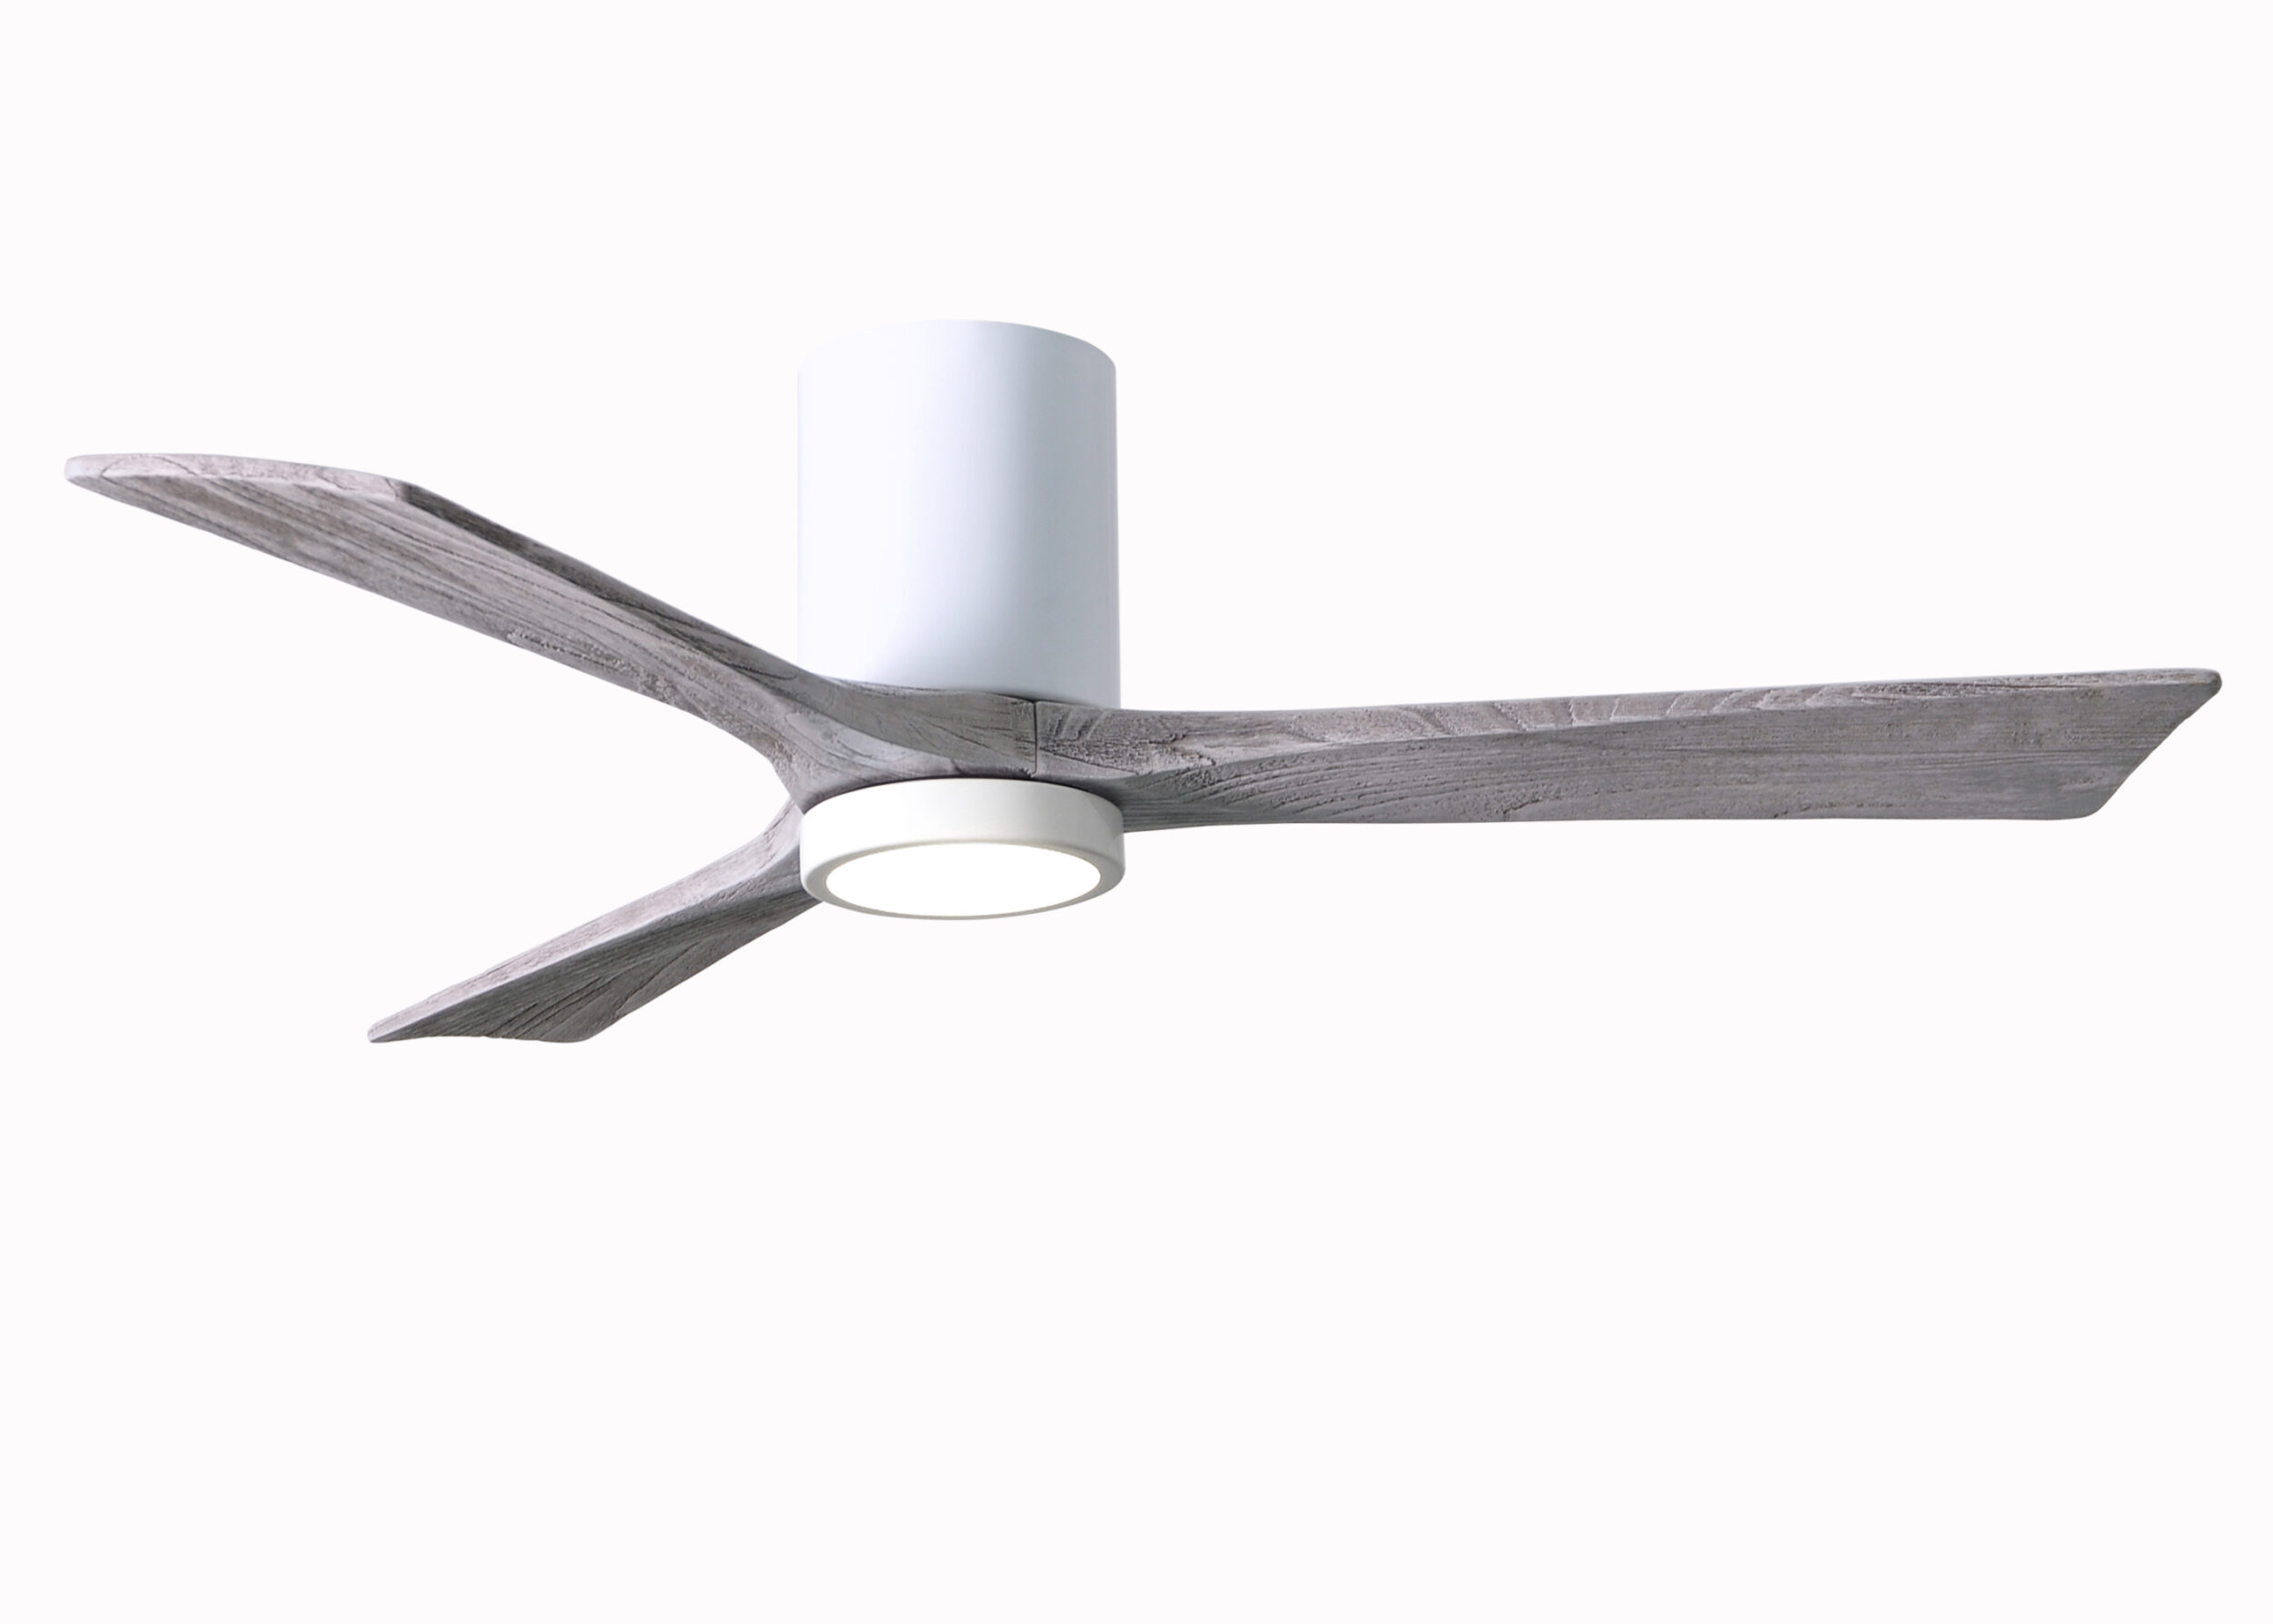 Irene-3HLK Ceiling Fan in Gloss White Finish with 52